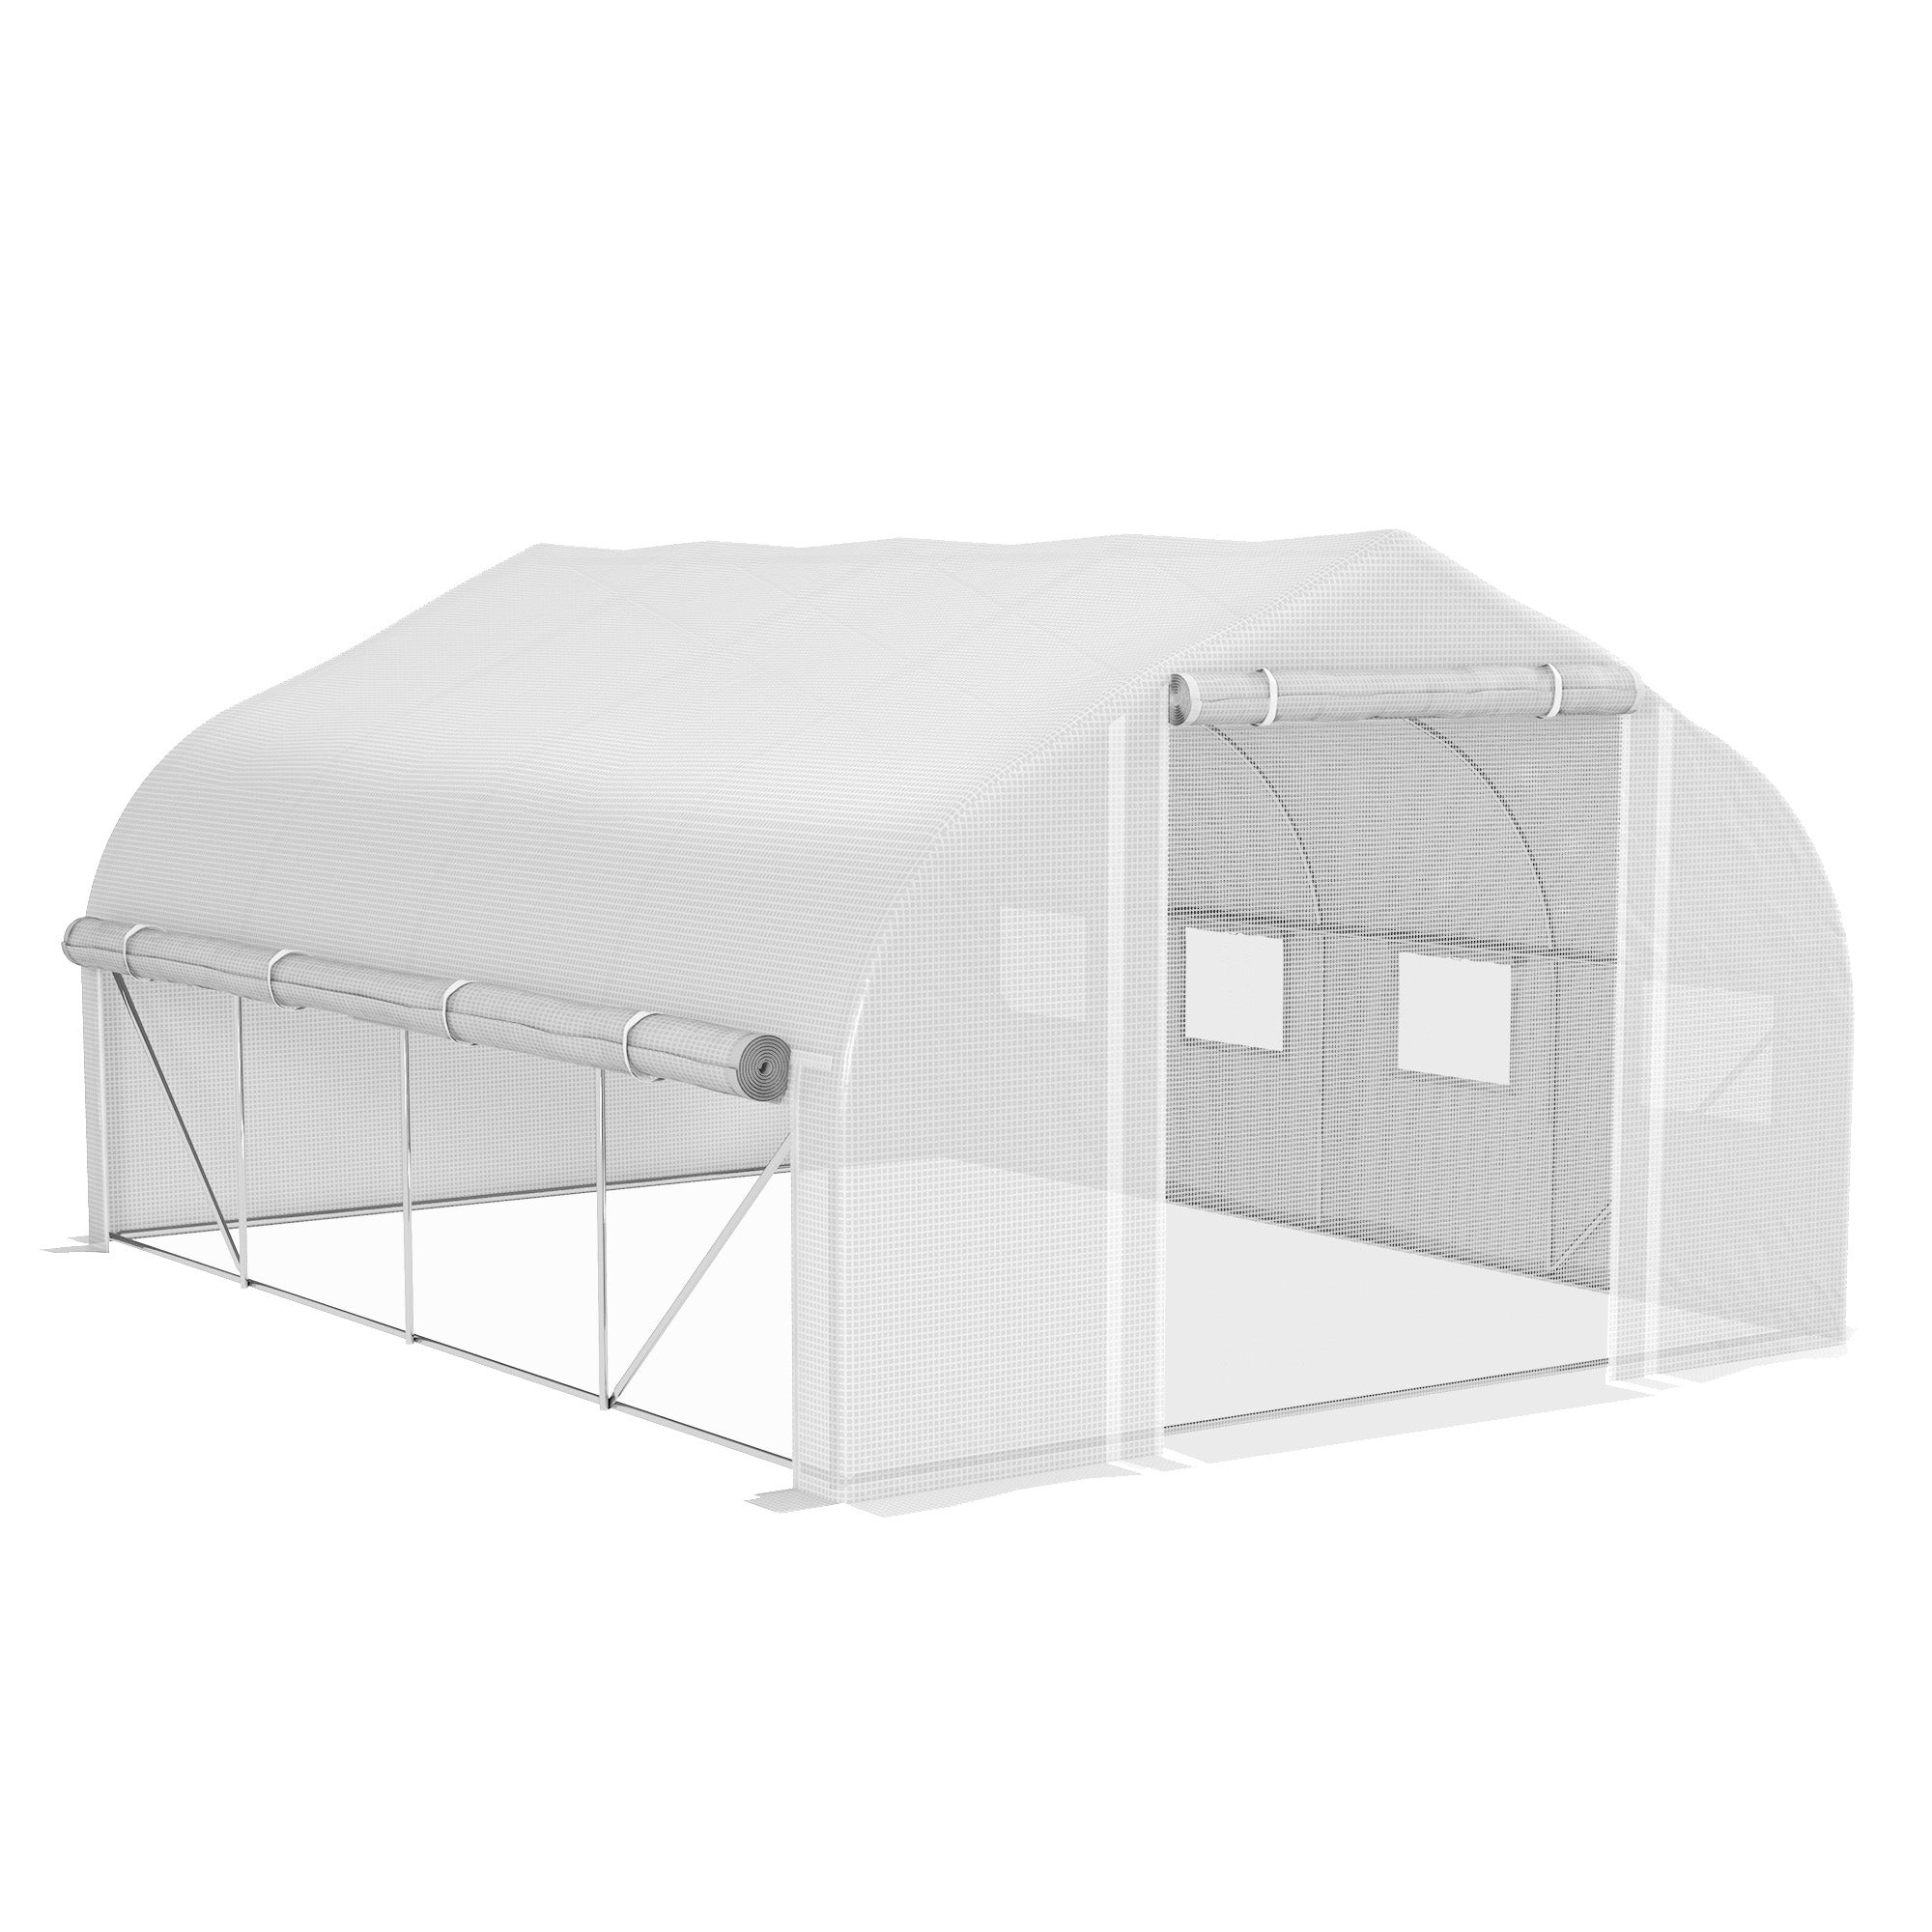 Outsunny 4 x 3(m) Walk-in Tunnel Greenhouse - Roll Up Sidewalls - Mesh Door  | TJ Hughes White